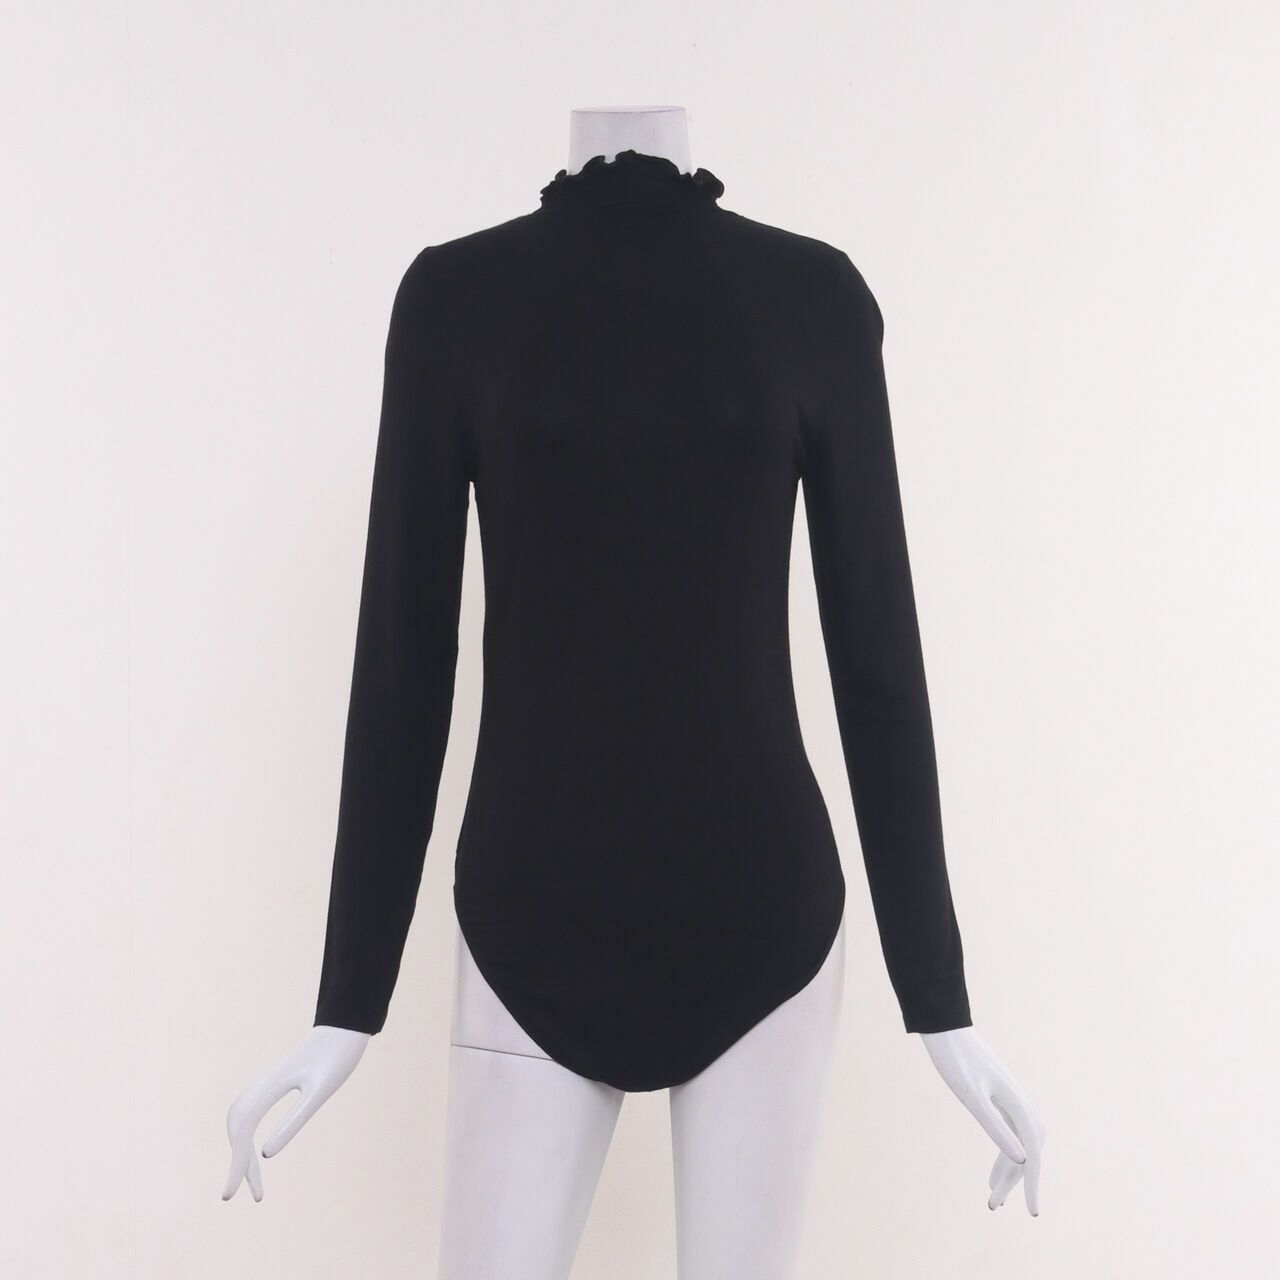 New Look Black One Piece Blouse 